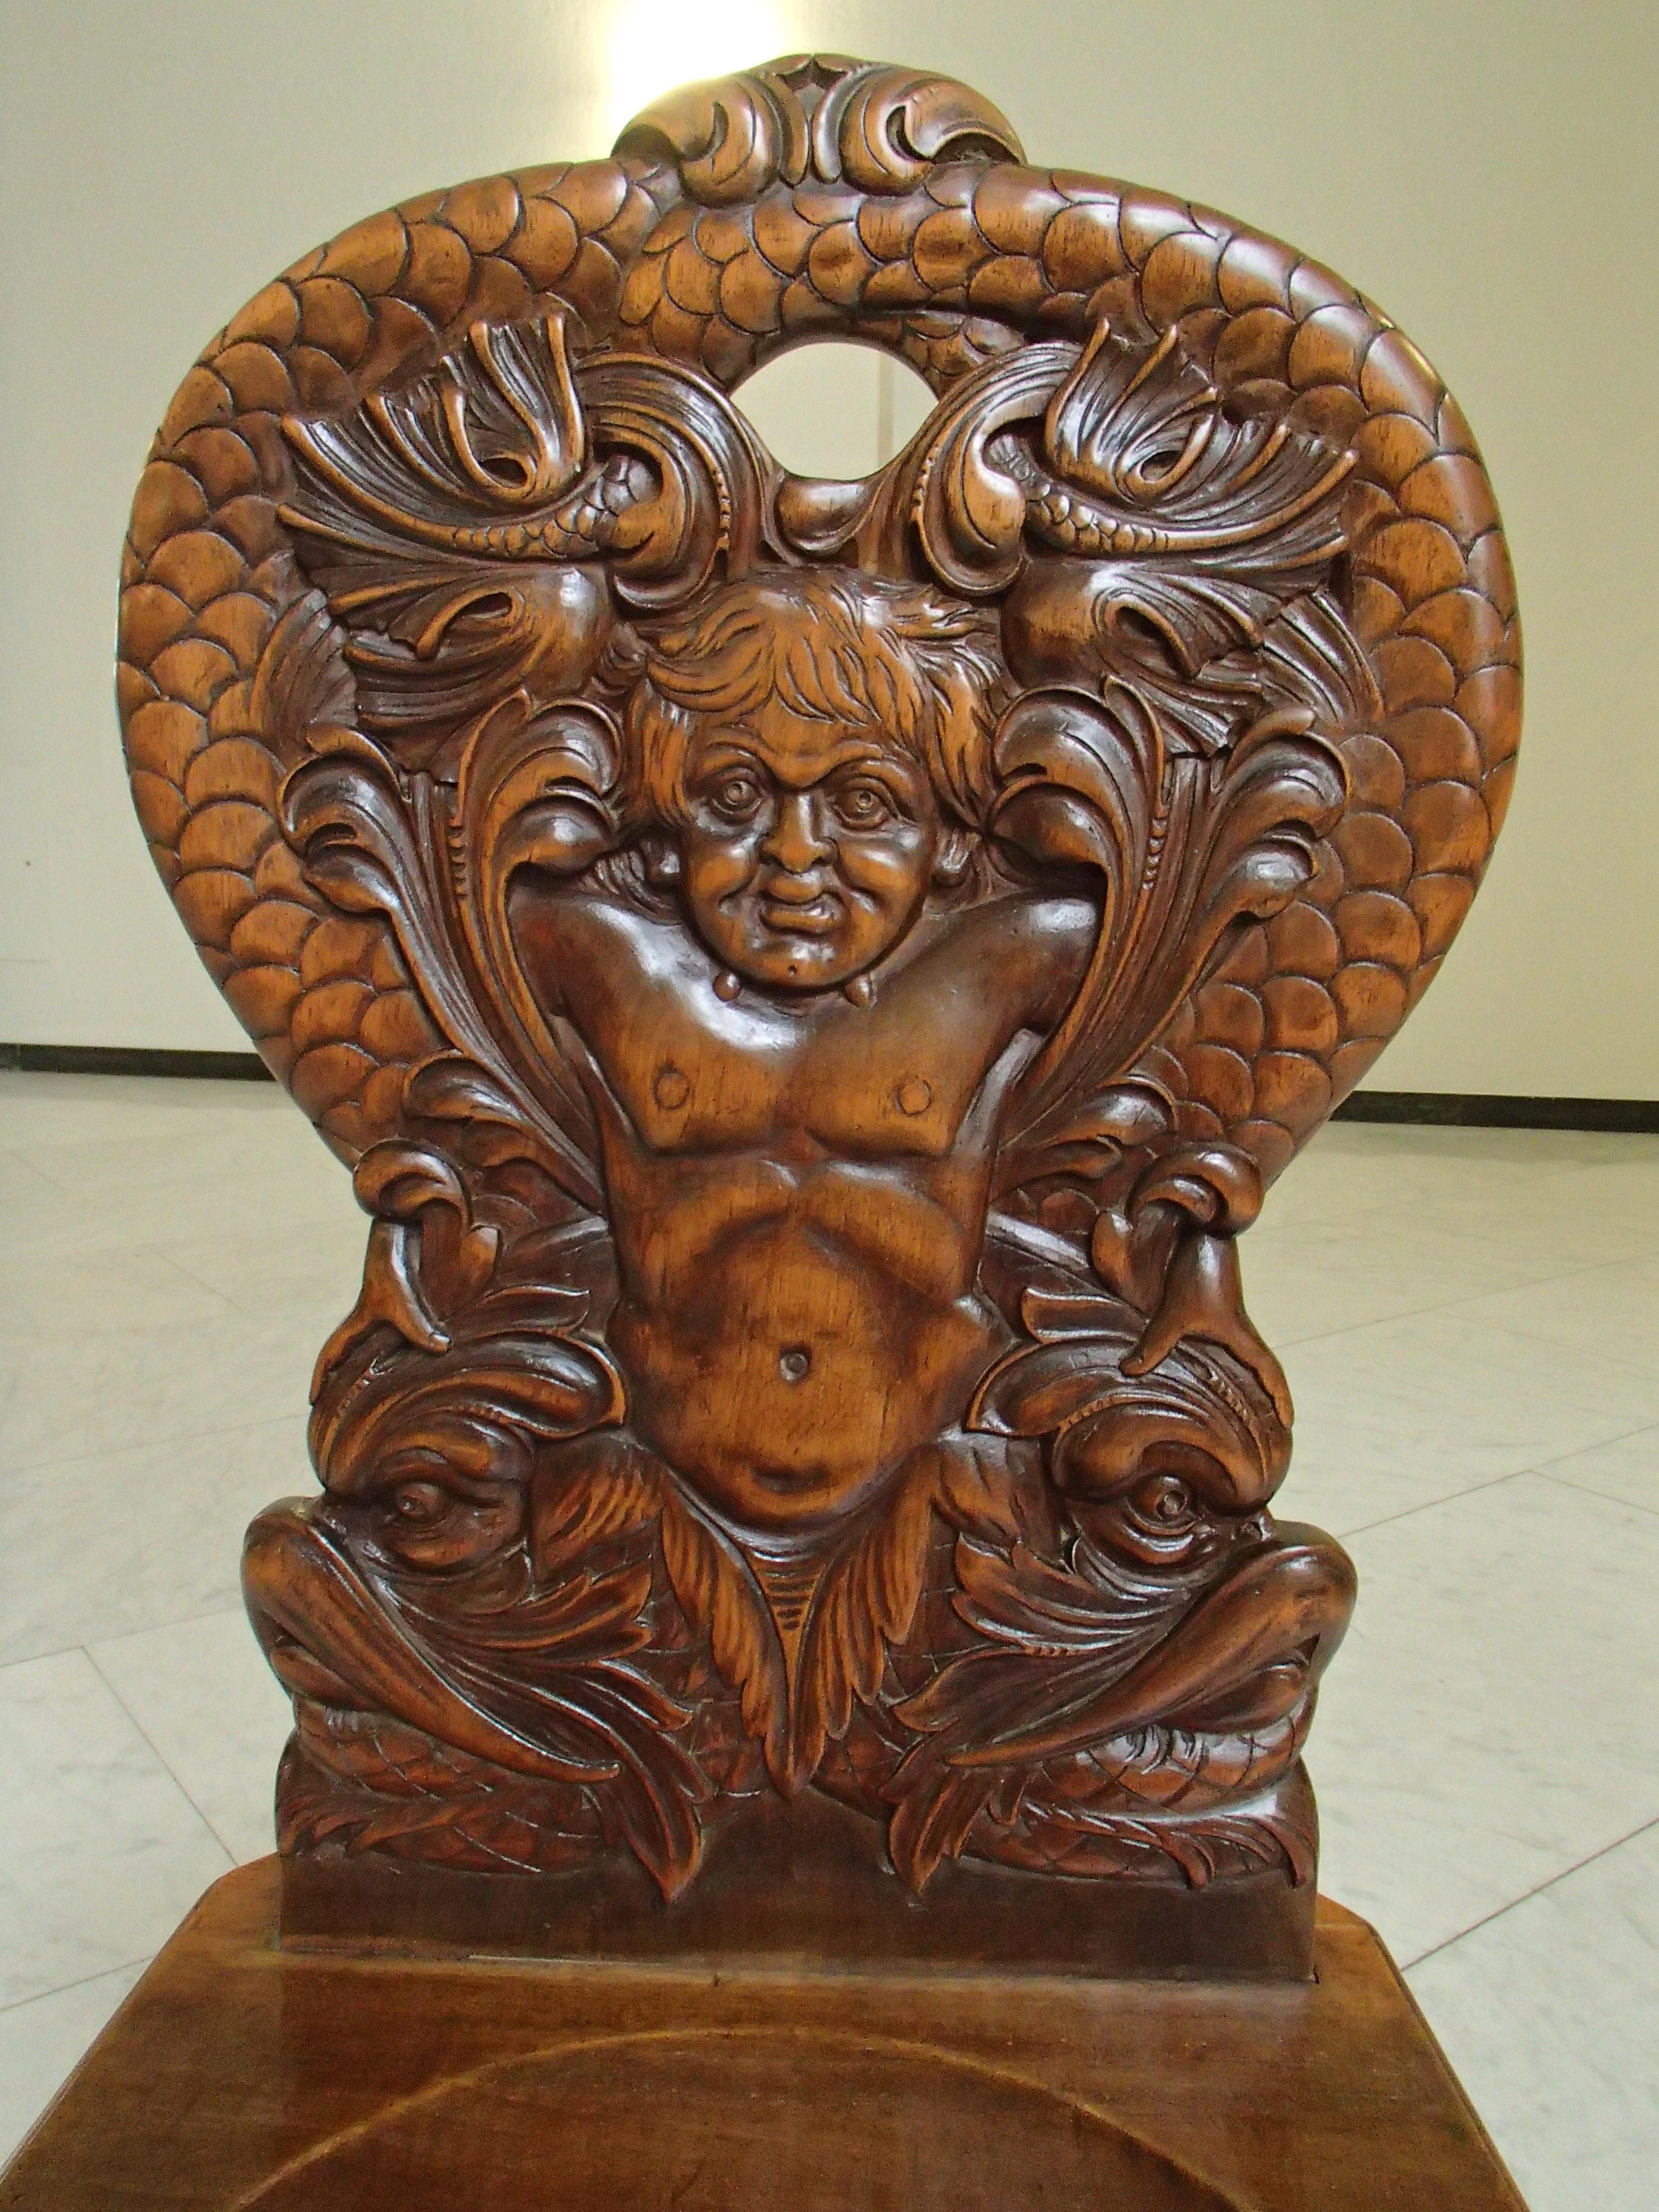 Pair of Brutalist Wooden Chairs Carved with Fabulous Creatures - Dragons 3